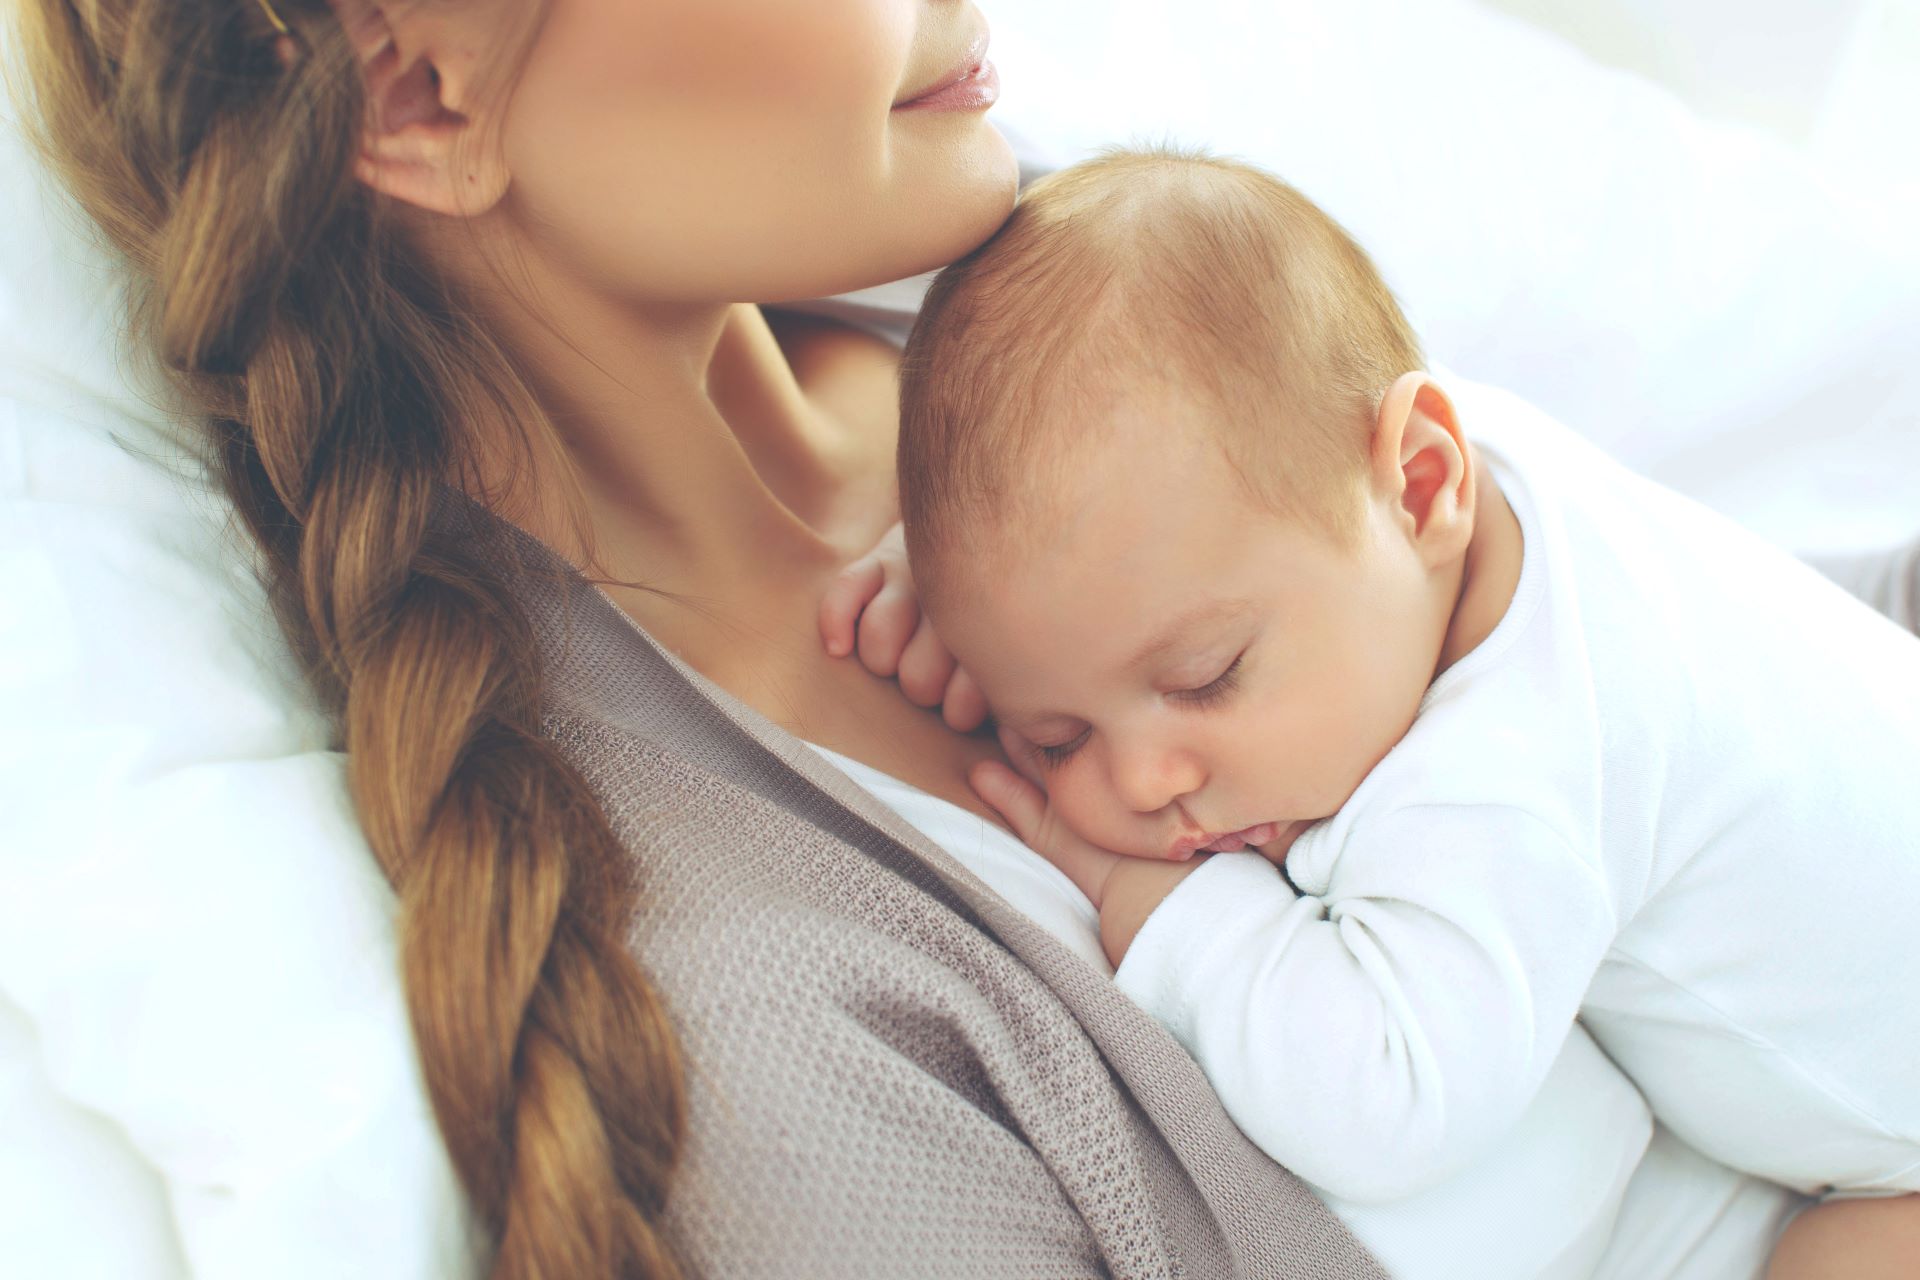 Breasts Too Small To Breastfeed: Can I Breastfeed?